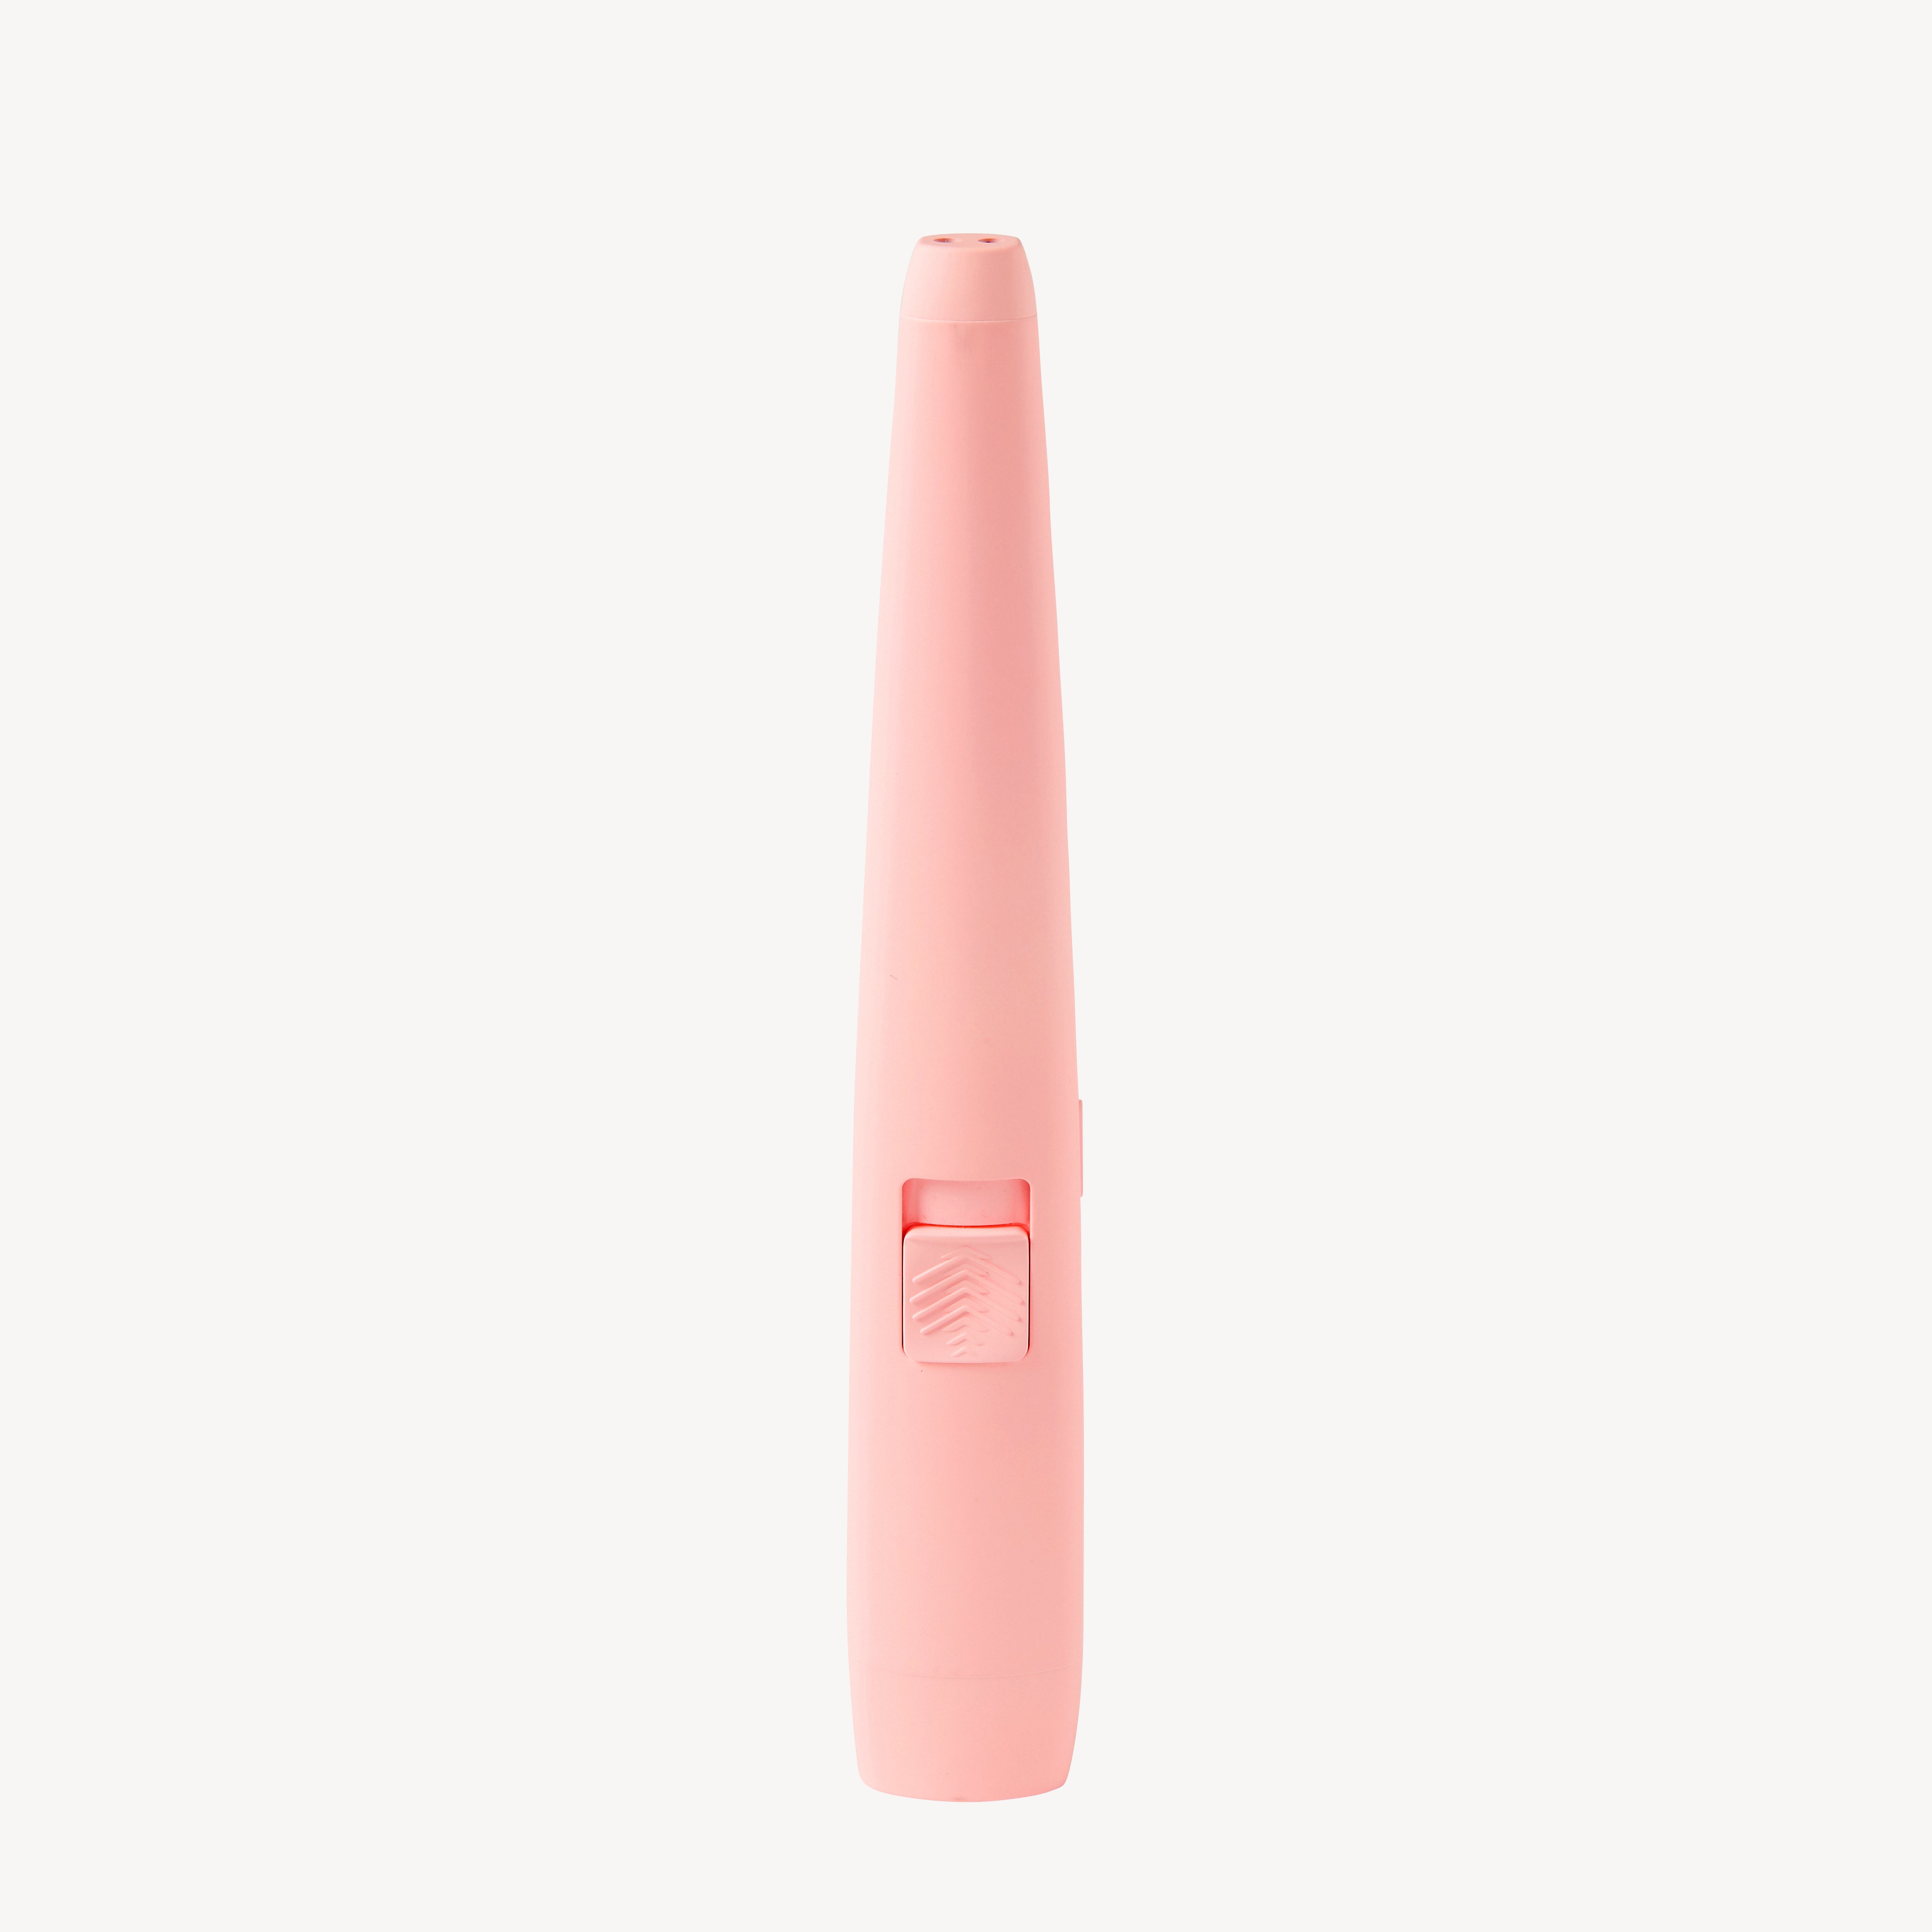 USB Candle Lighter - Pink